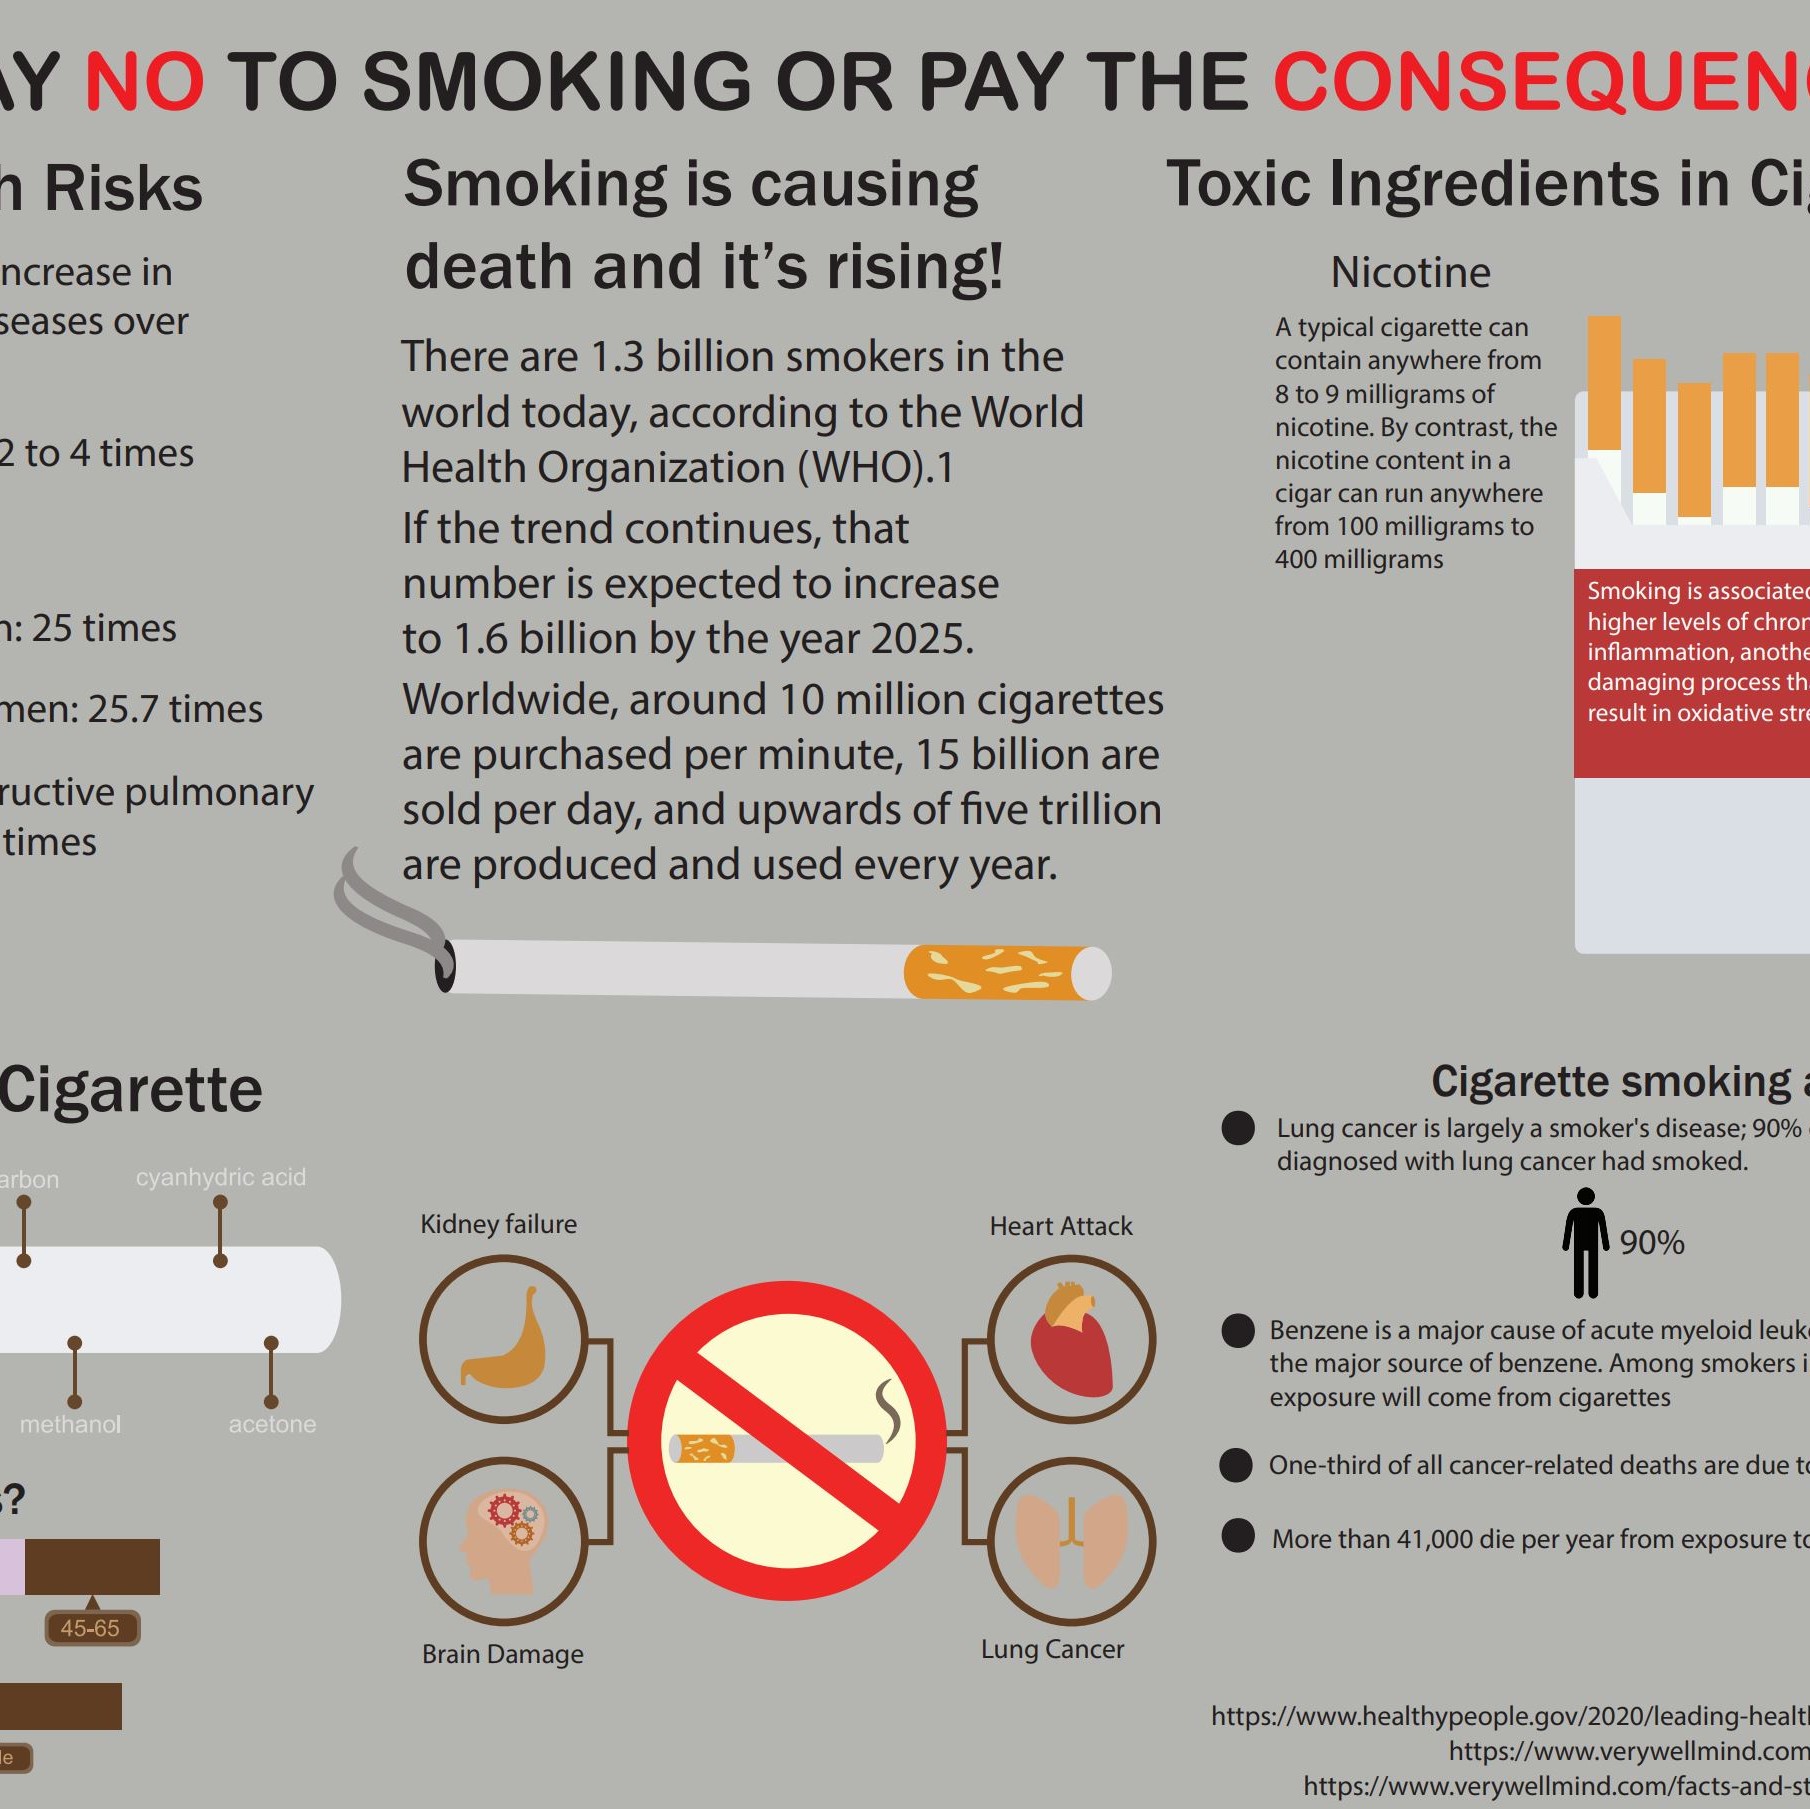 SAY NO TO SMOKING OR PAY THE CONSEQUENCE!